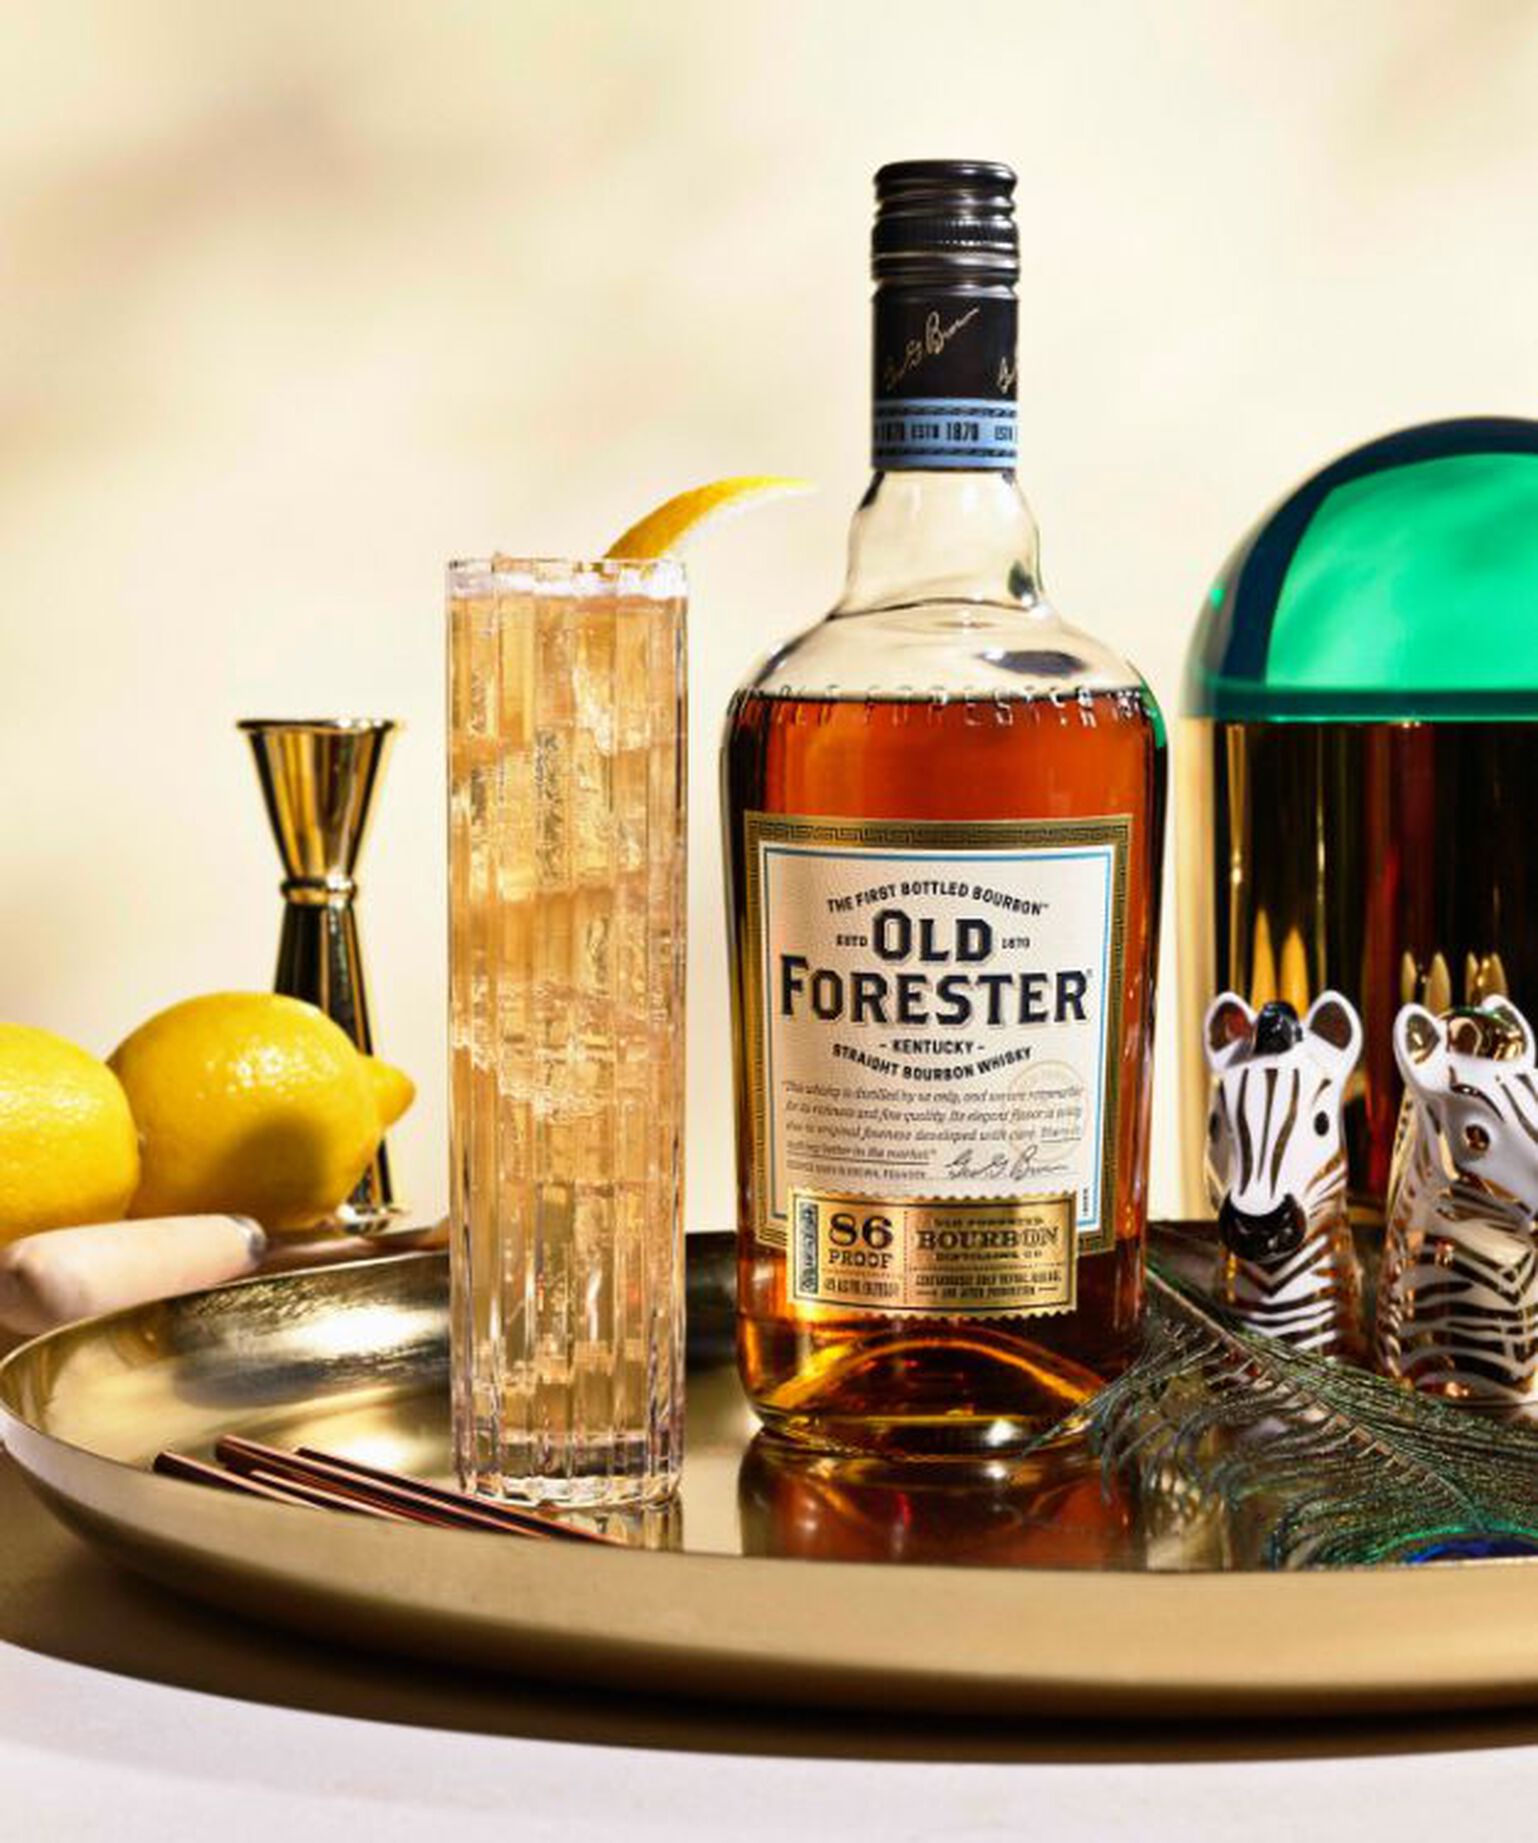 A bottle of Old Forester with a cocktail